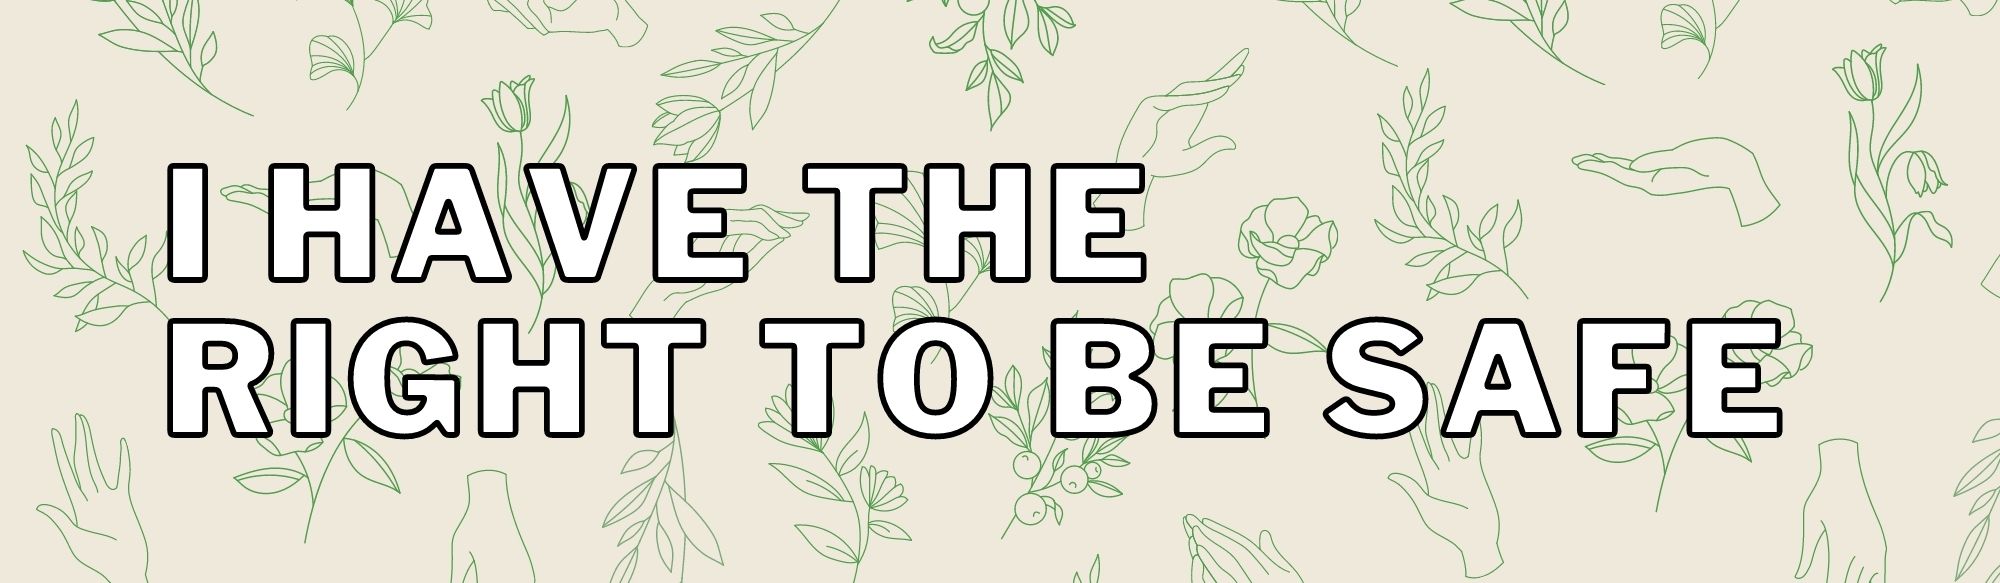 Graphic with the text "I have the right to be safe" on top of a beige background with green illustrations of plants around.